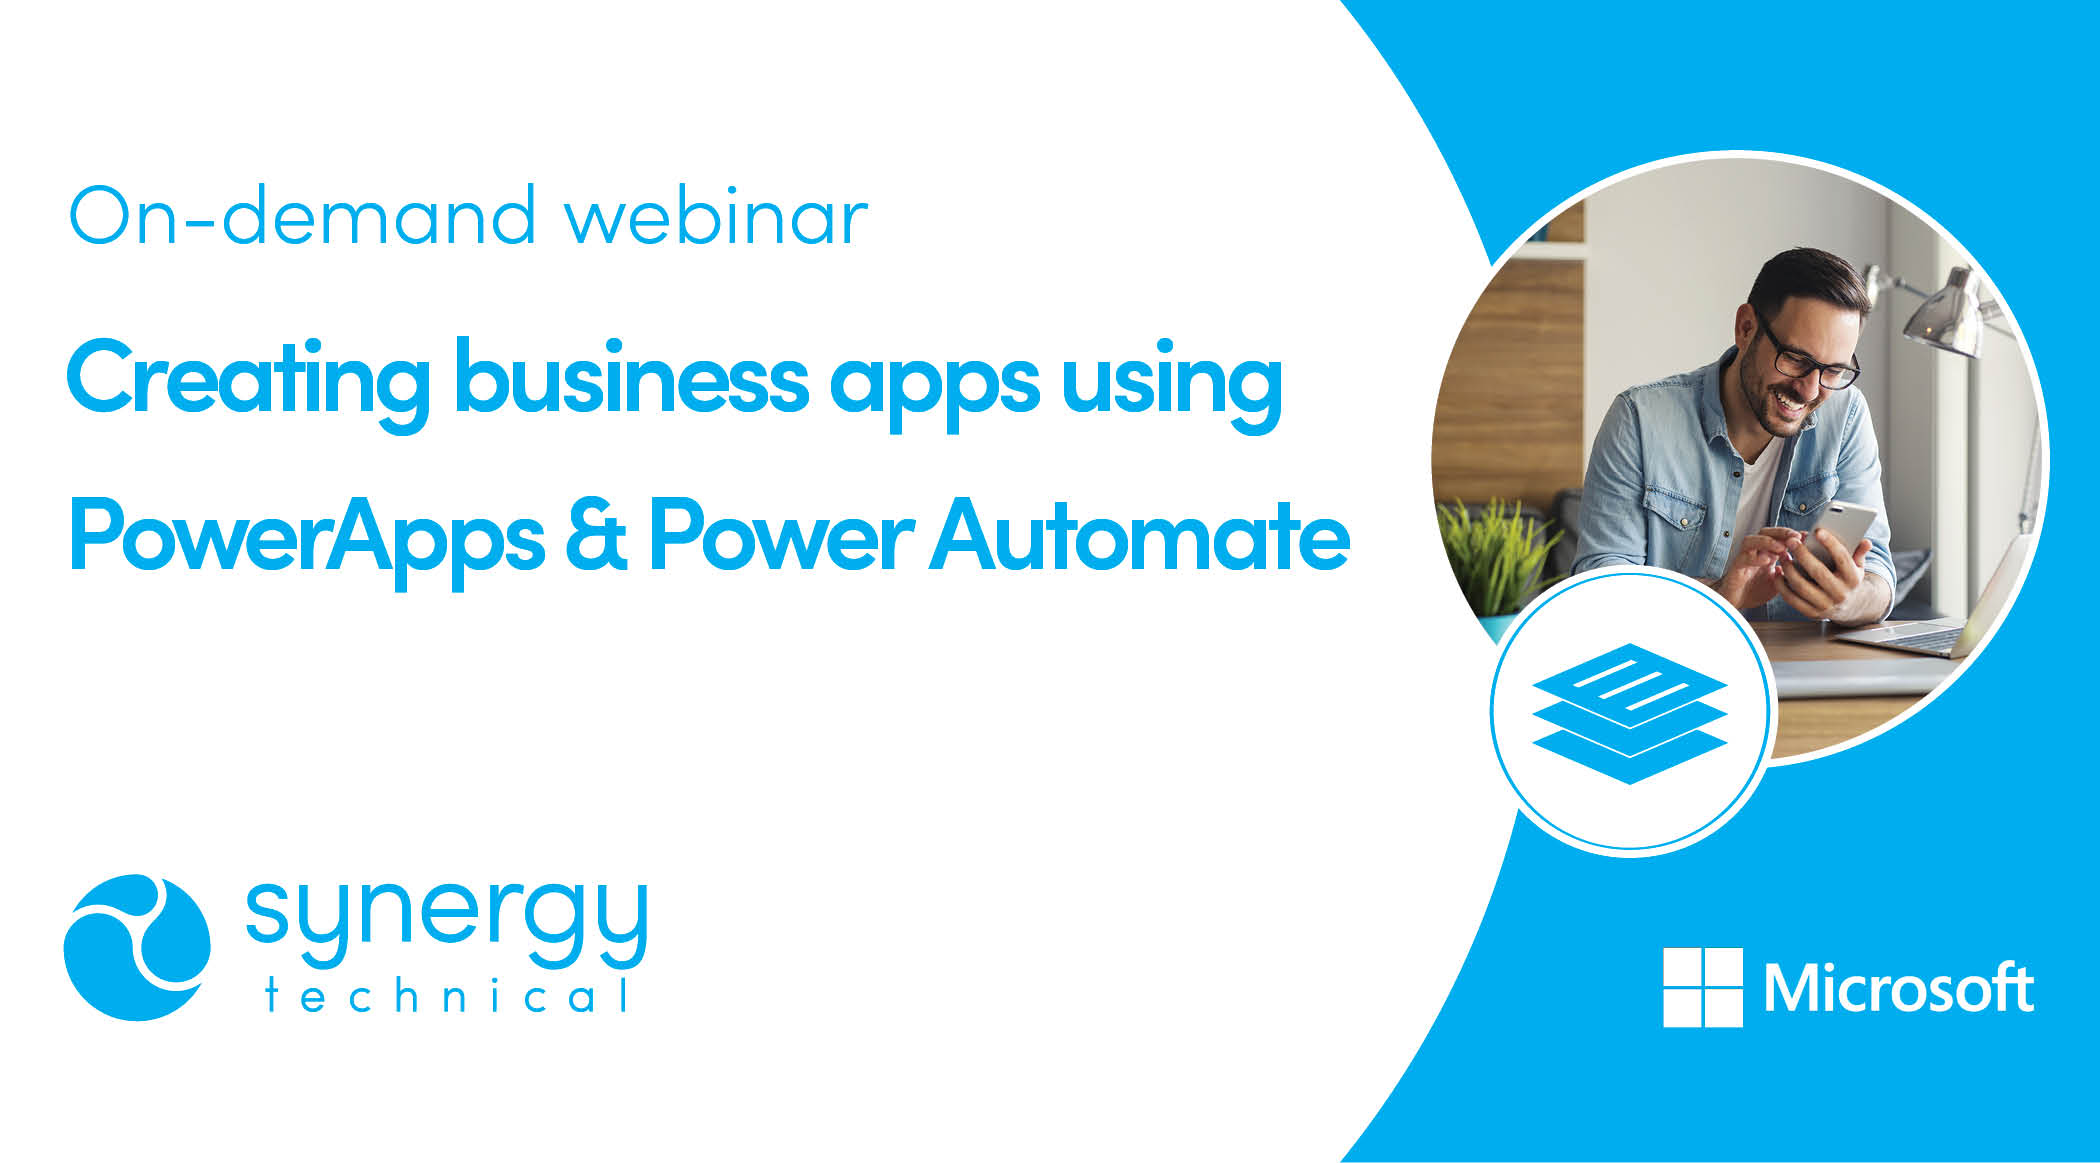 Creating business apps using PowerApps & Power Automate